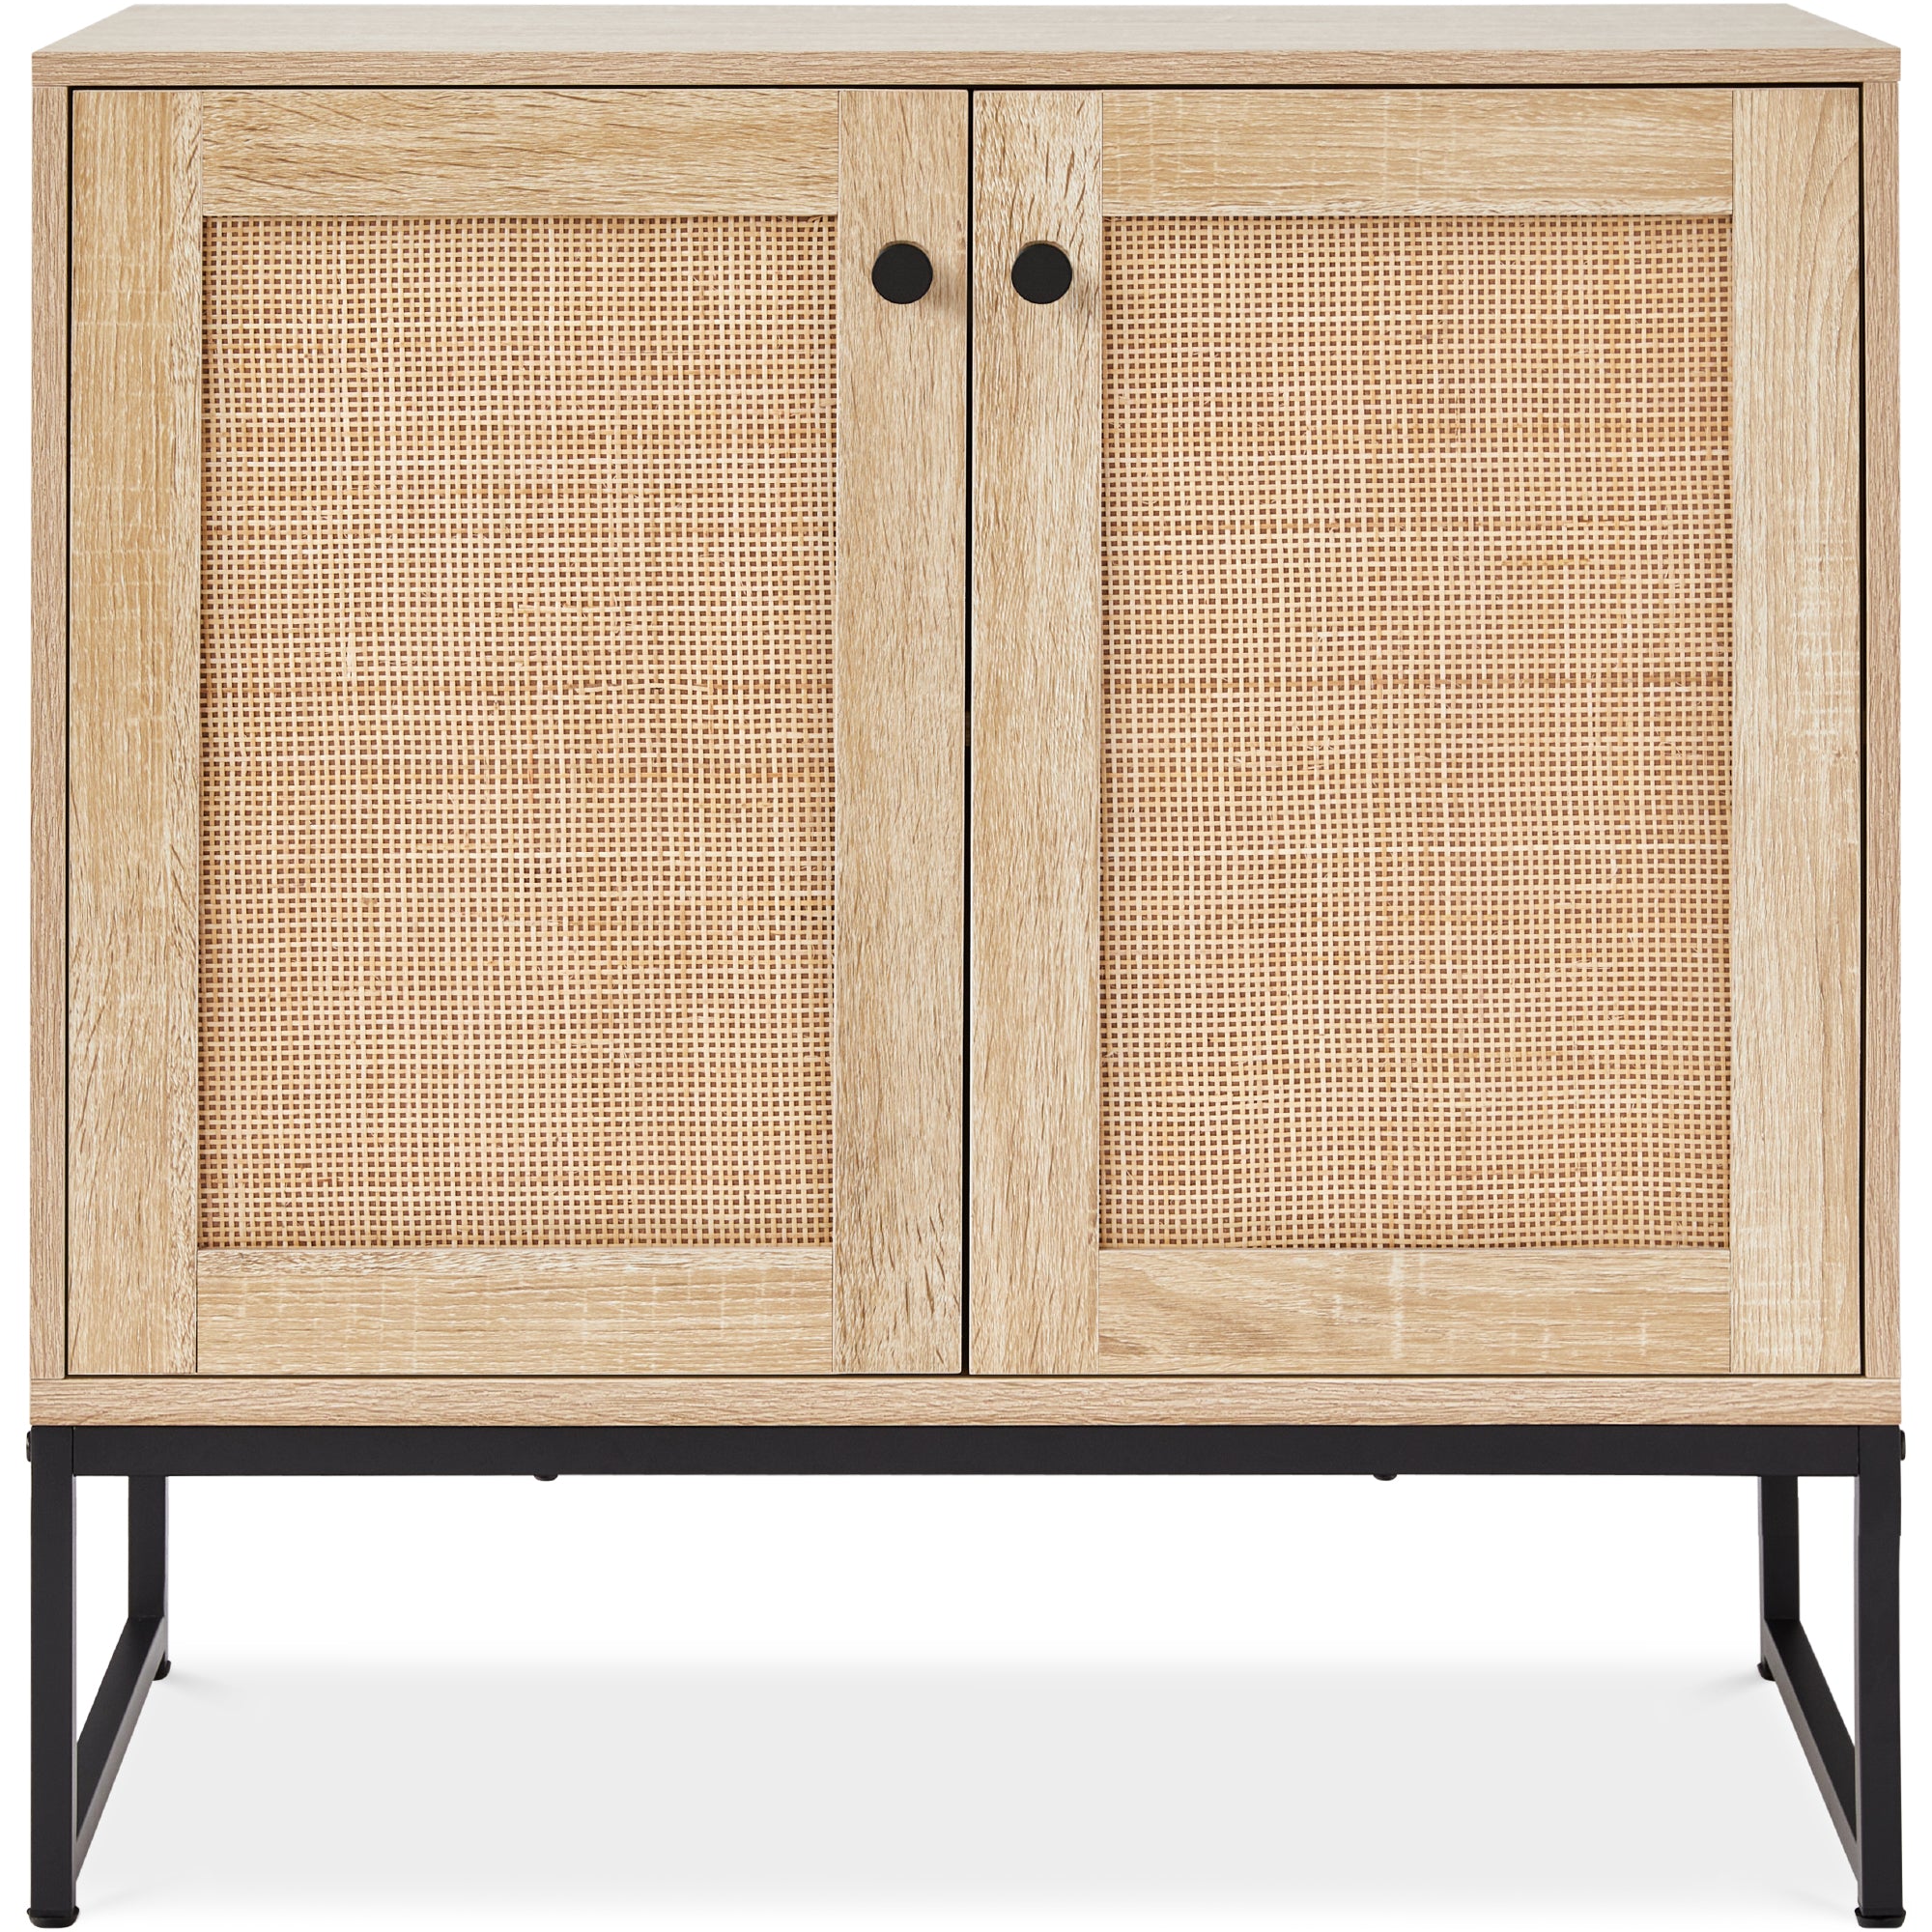 Accent Living Products Choice – for Storage Best Furniture Room w/ Cabinet 2-Door Foot Rattan